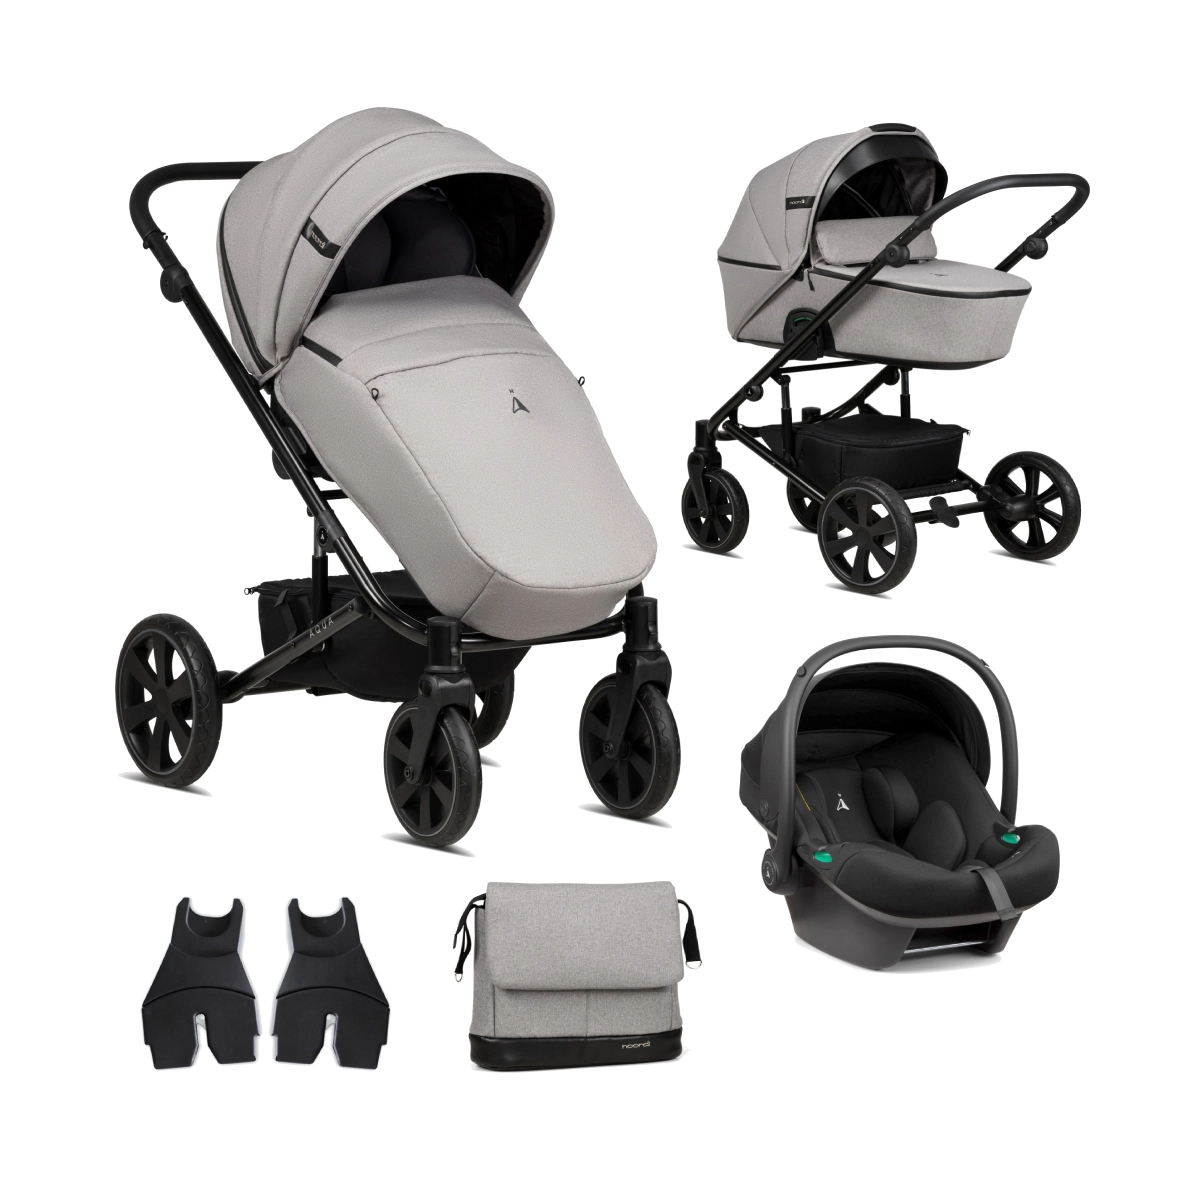 Noordi Aqua Thermo 3in1 Travel System with Terra i-Size Car Seat